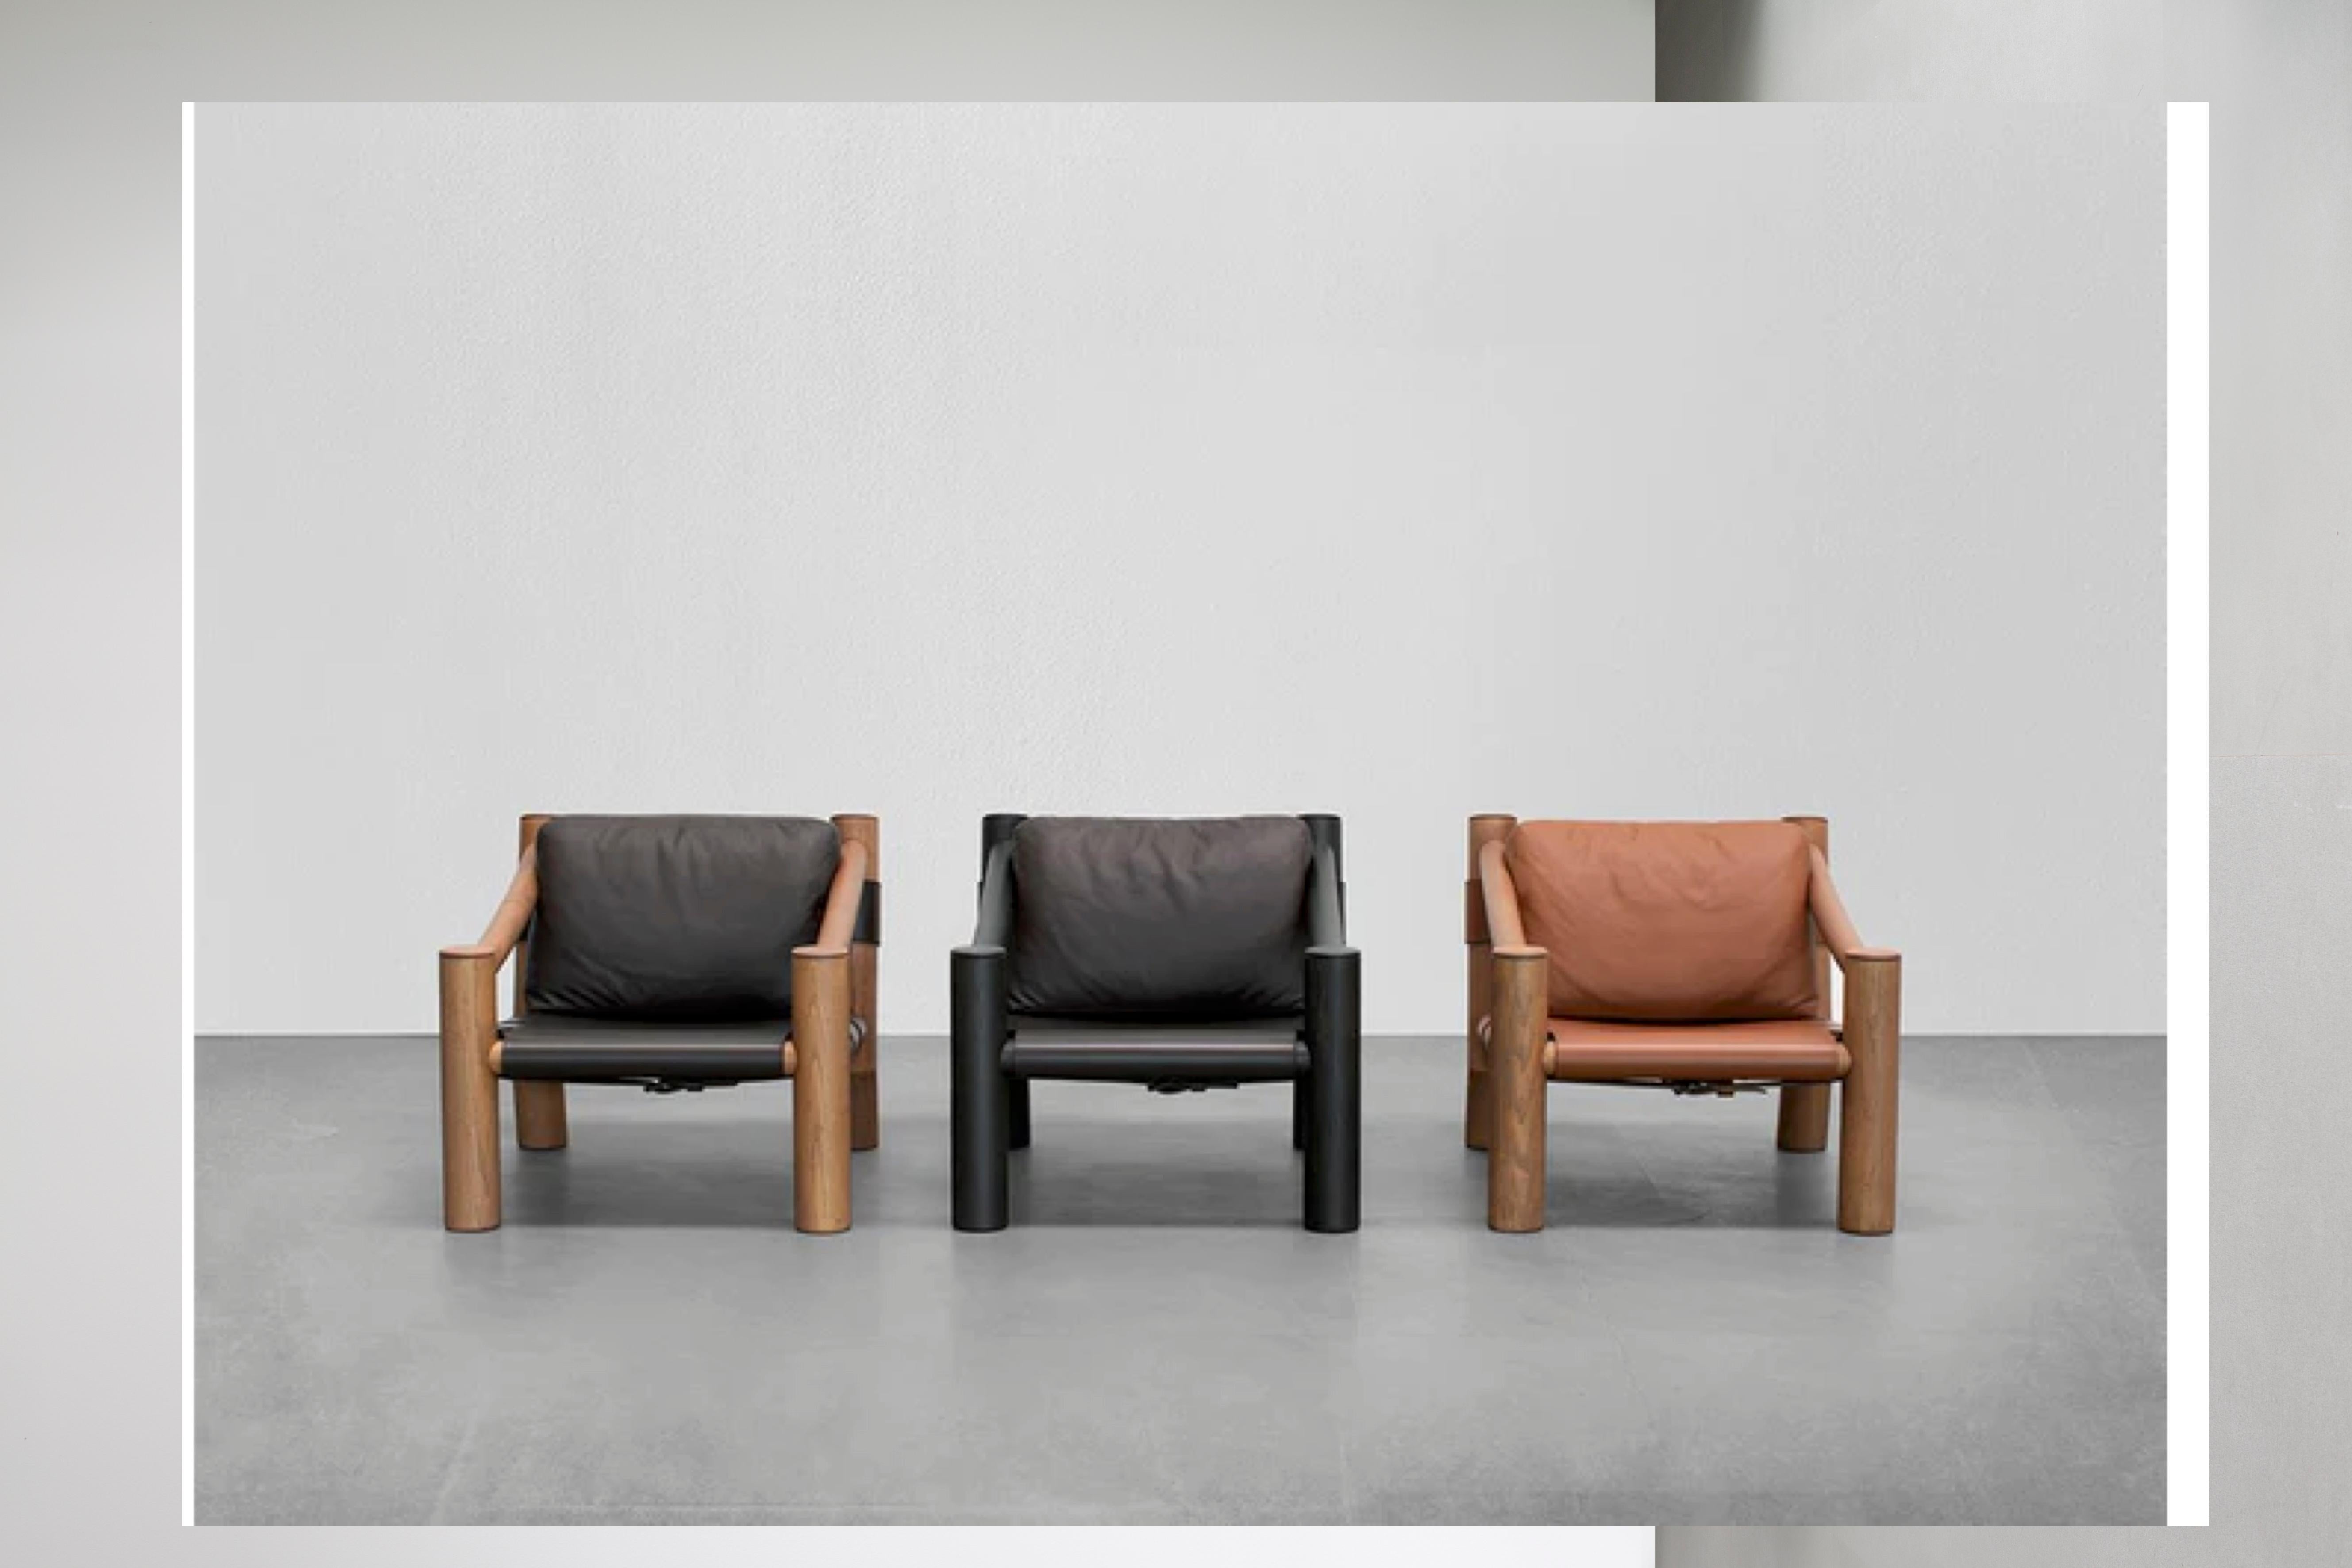 frame finishes: Walnut or anthracite grey
Color leather available: Black, dark brown or hide (cuoio)
Clear lines and volumes are combined with fine cabinet-making in this iconic chair by Lebanese designer Karen Chekerdjian. Elephant’s base is made